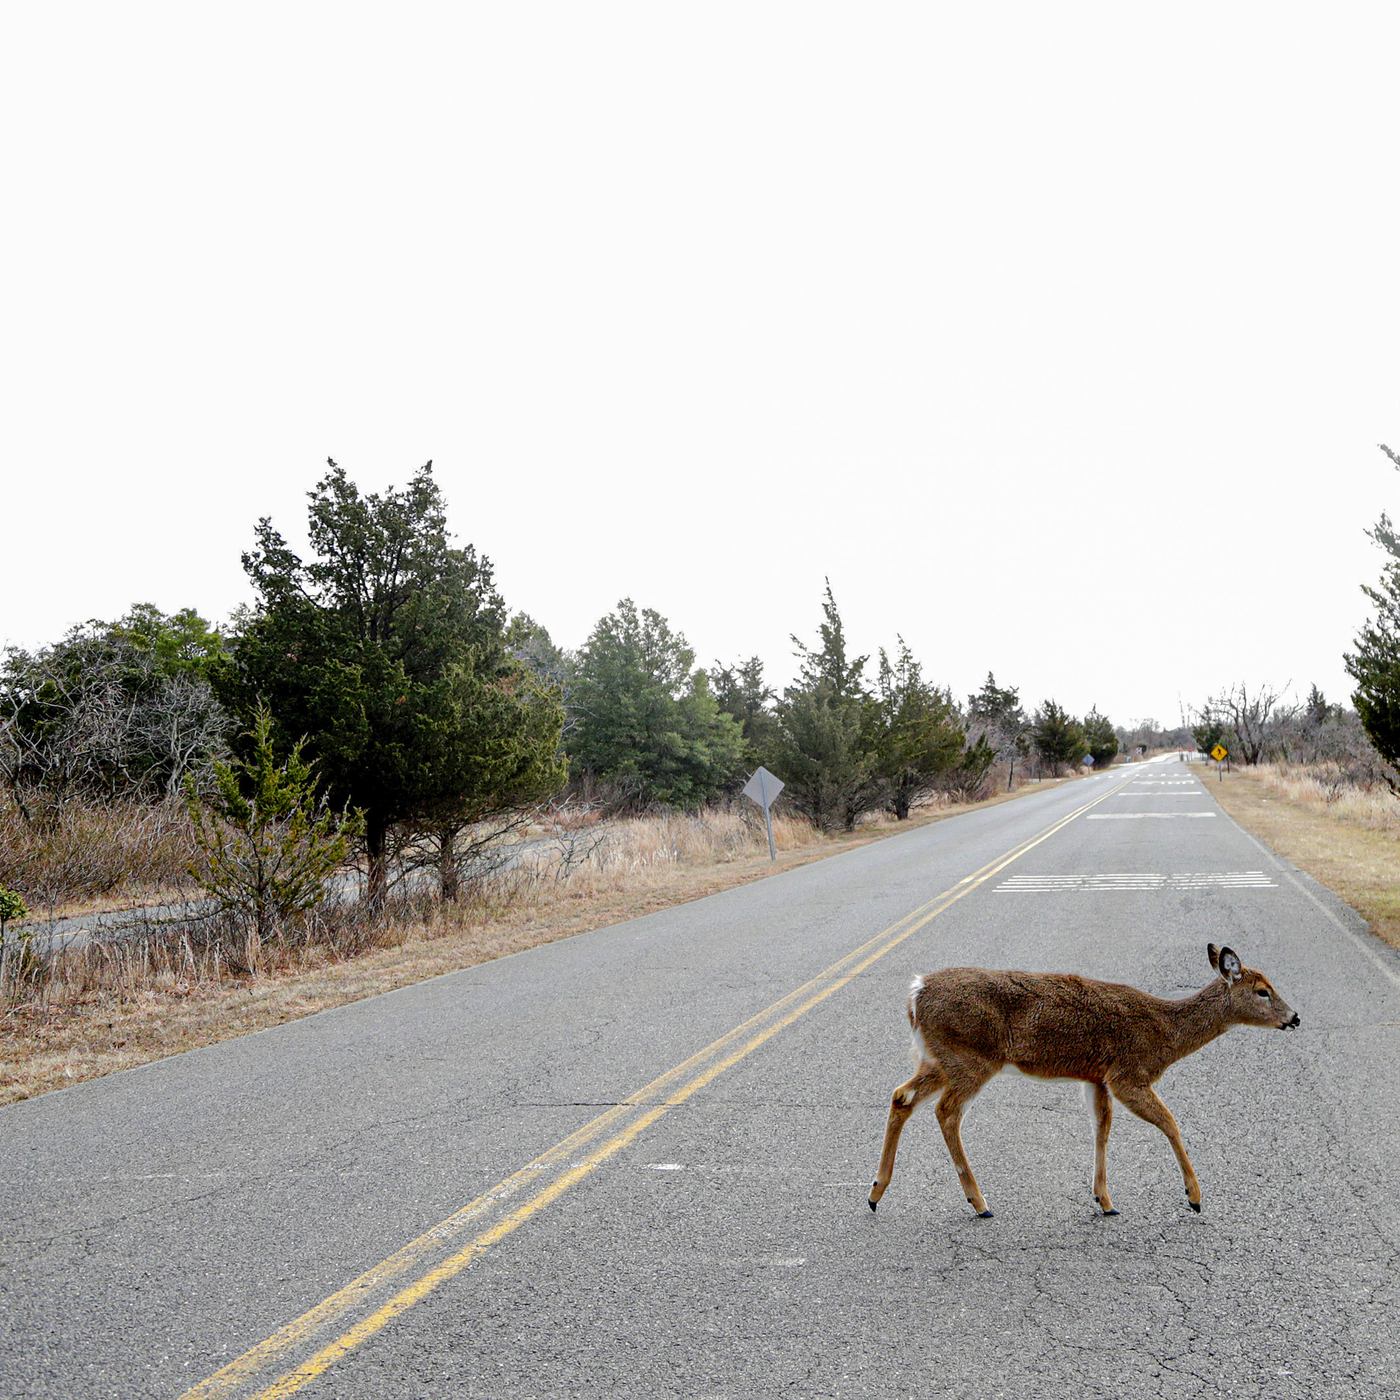 How Climate Change Drives Deer Populations